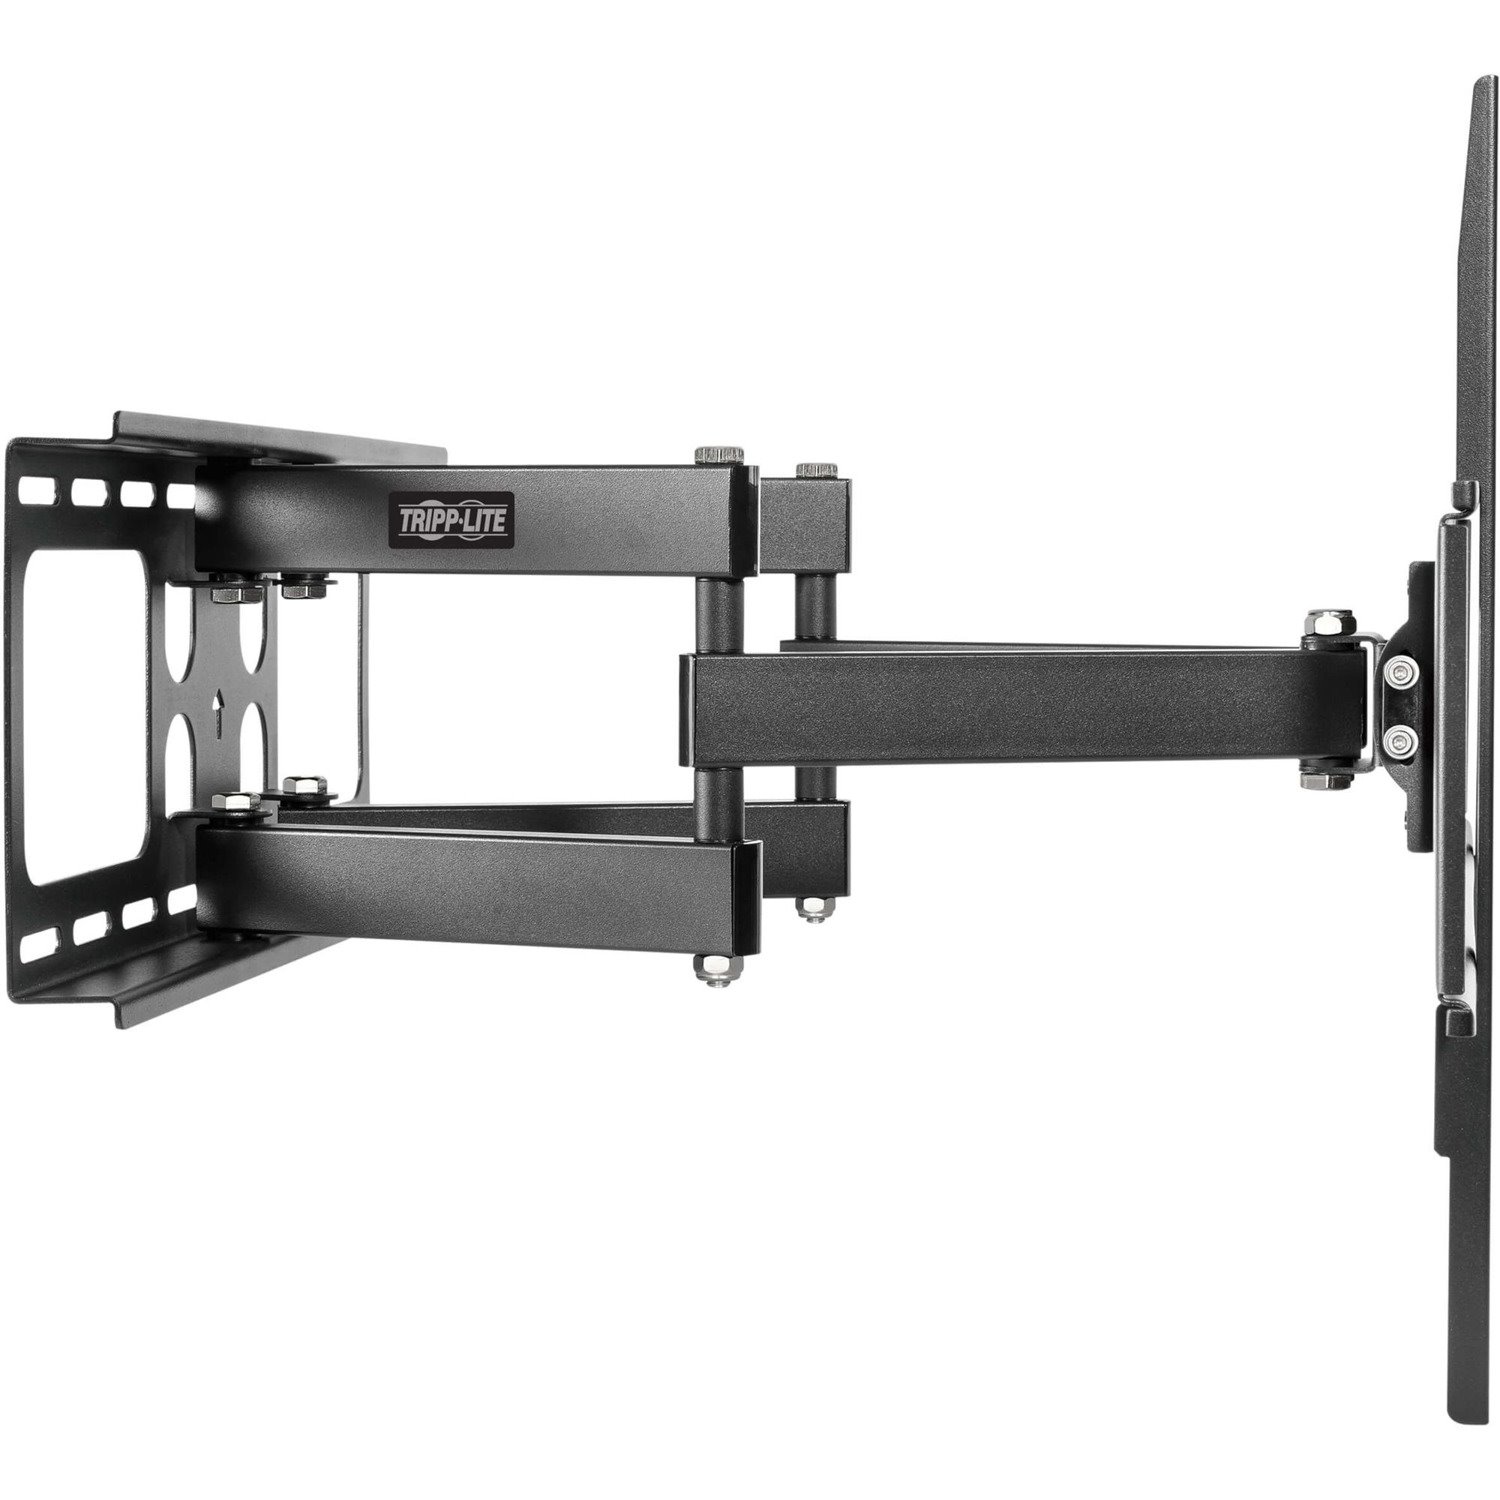 Tripp Lite by Eaton Outdoor Full-Motion TV Wall Mount with Fully Articulating Arm for 37" to 80" Flat-Screen Displays